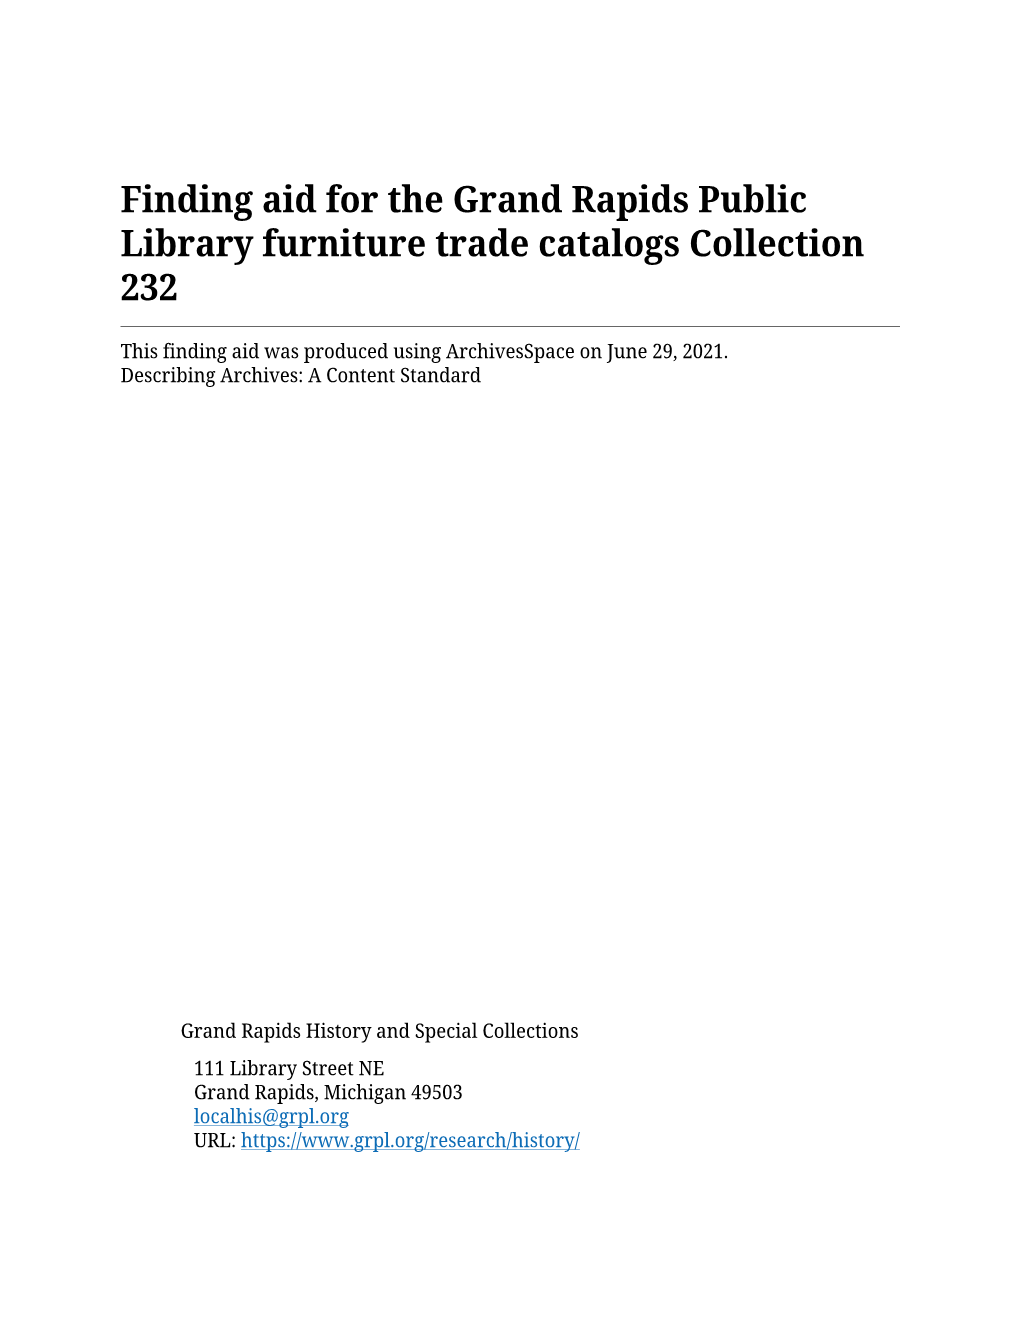 Finding Aid for the Grand Rapids Public Library Furniture Trade Catalogs Collection 232